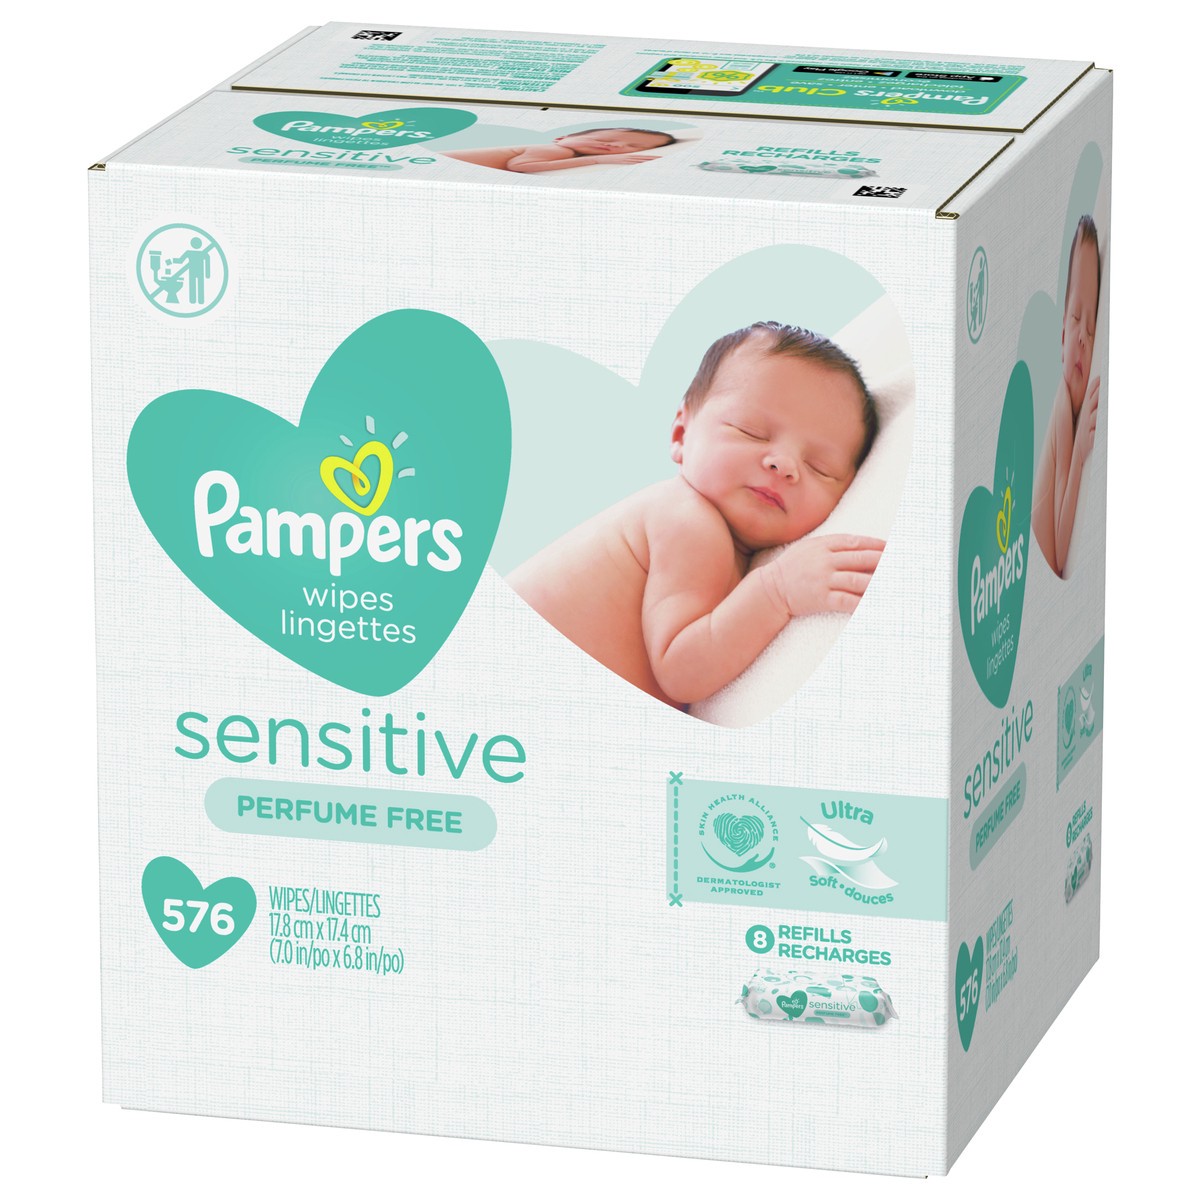 slide 3 of 4, Pampers Baby Wipes Sensitive Perfume Free 8X Refill Packs (Tub Not Included) 576 Count, 576 ct